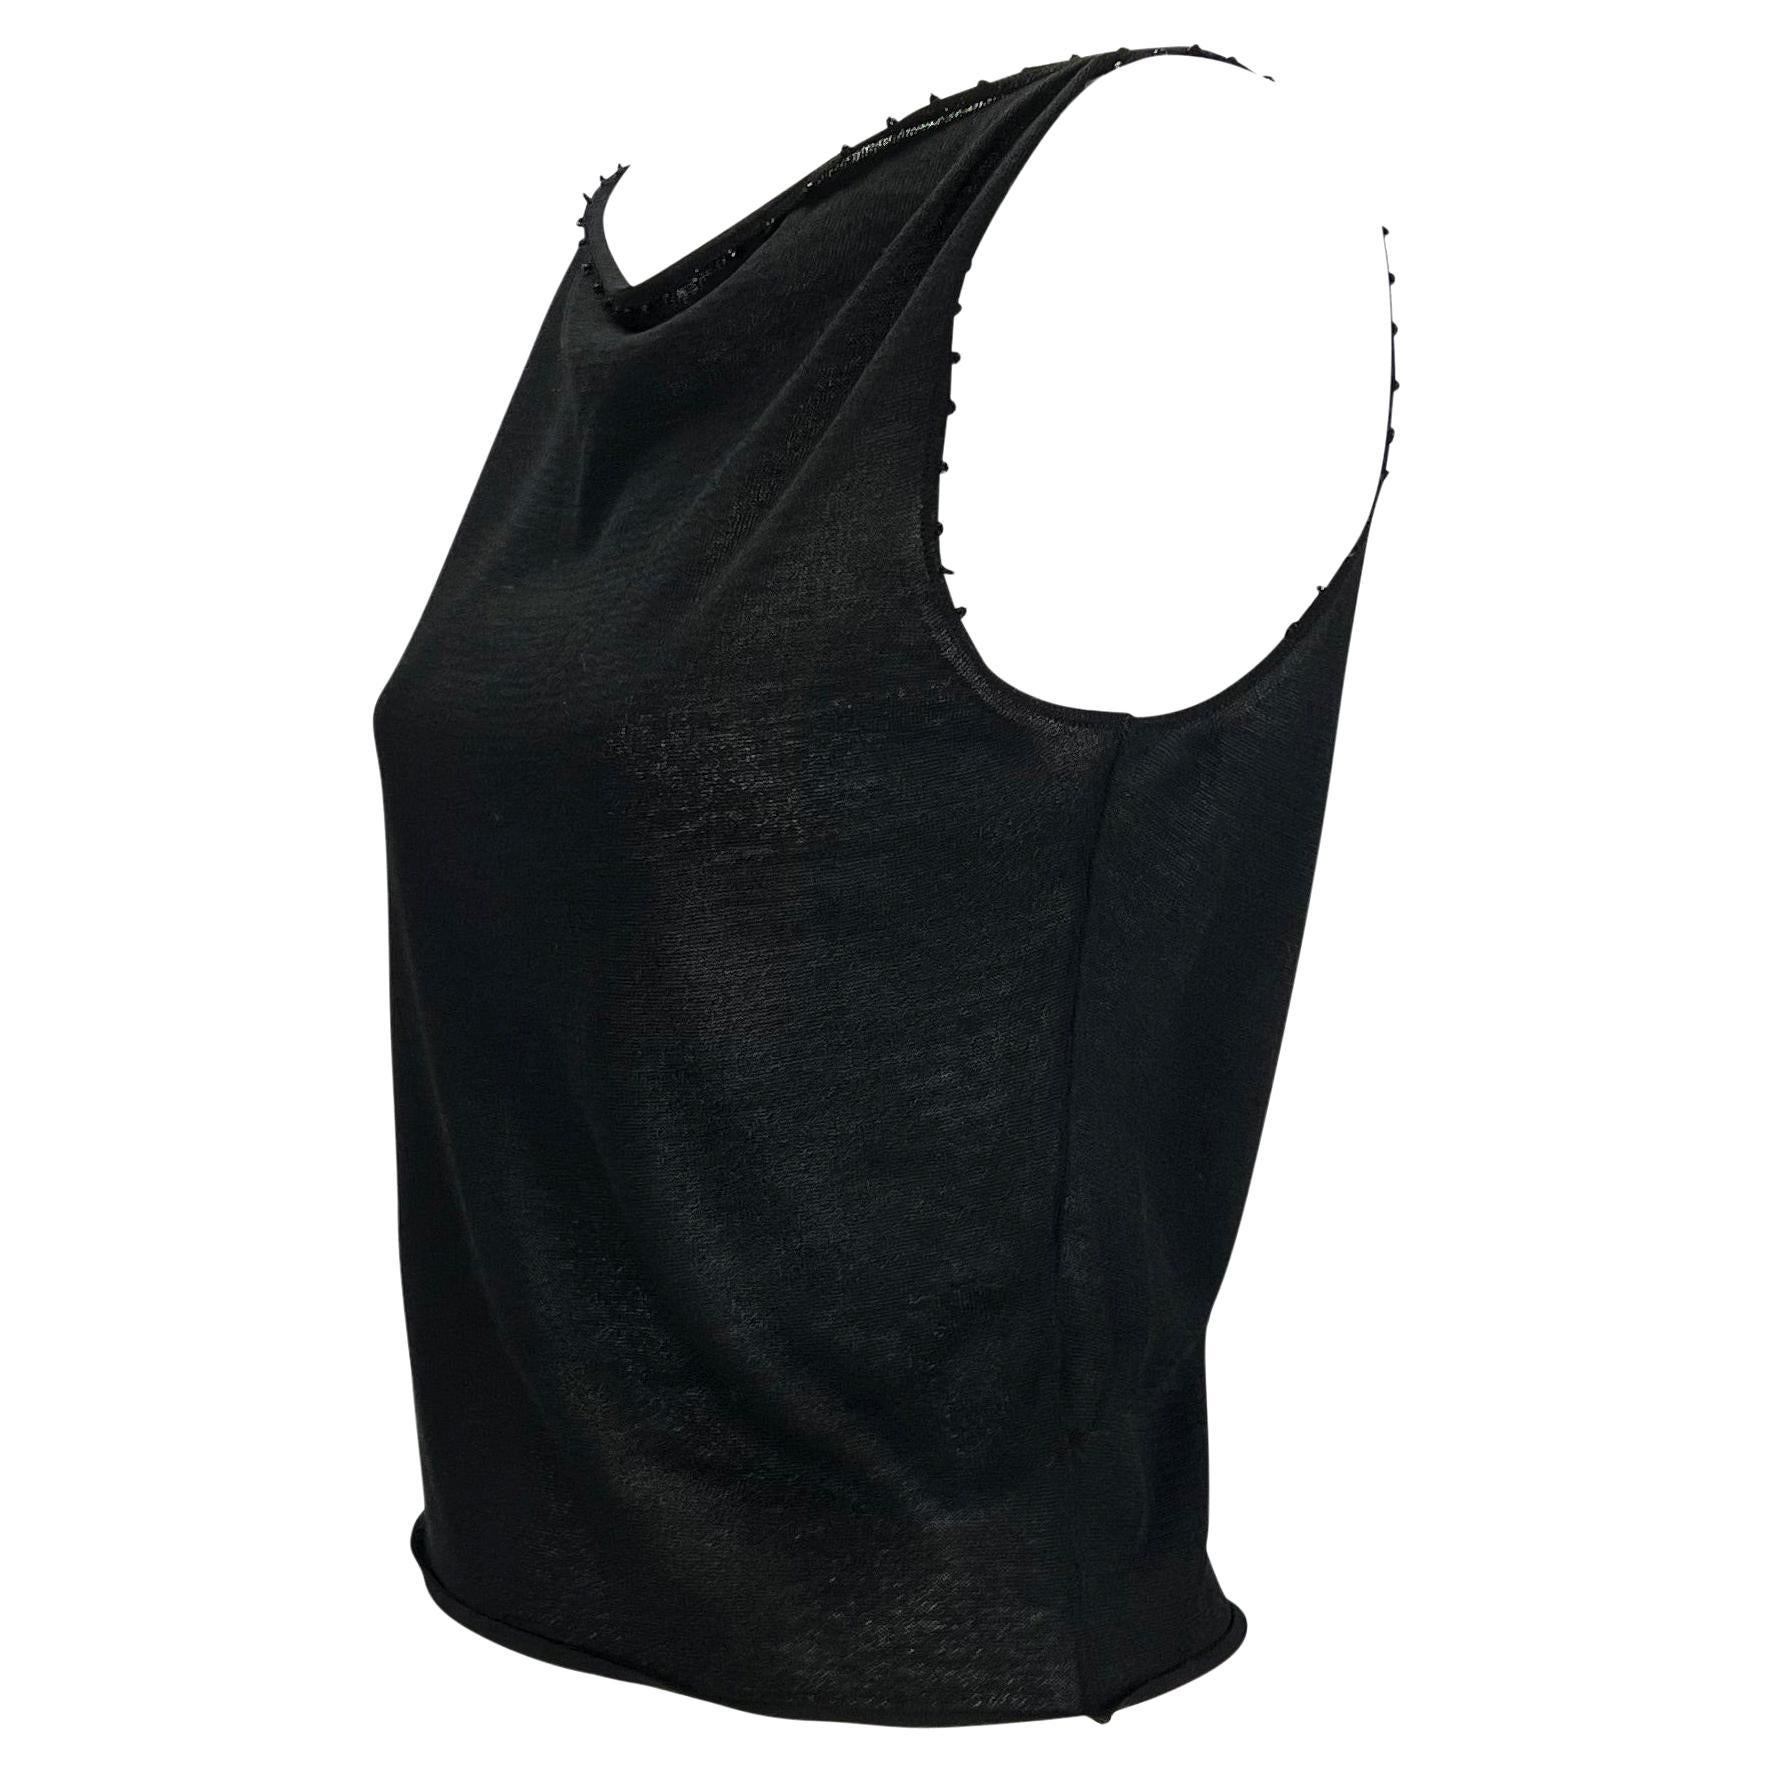 TheRealList presents: a black knit Gucci tank top, designed by Tom Ford. From 1999, this fabulous top features a wide neckline with a cowl effect. The top is elevated with caviar beads sewn around the neckline and armholes. Not your average tank